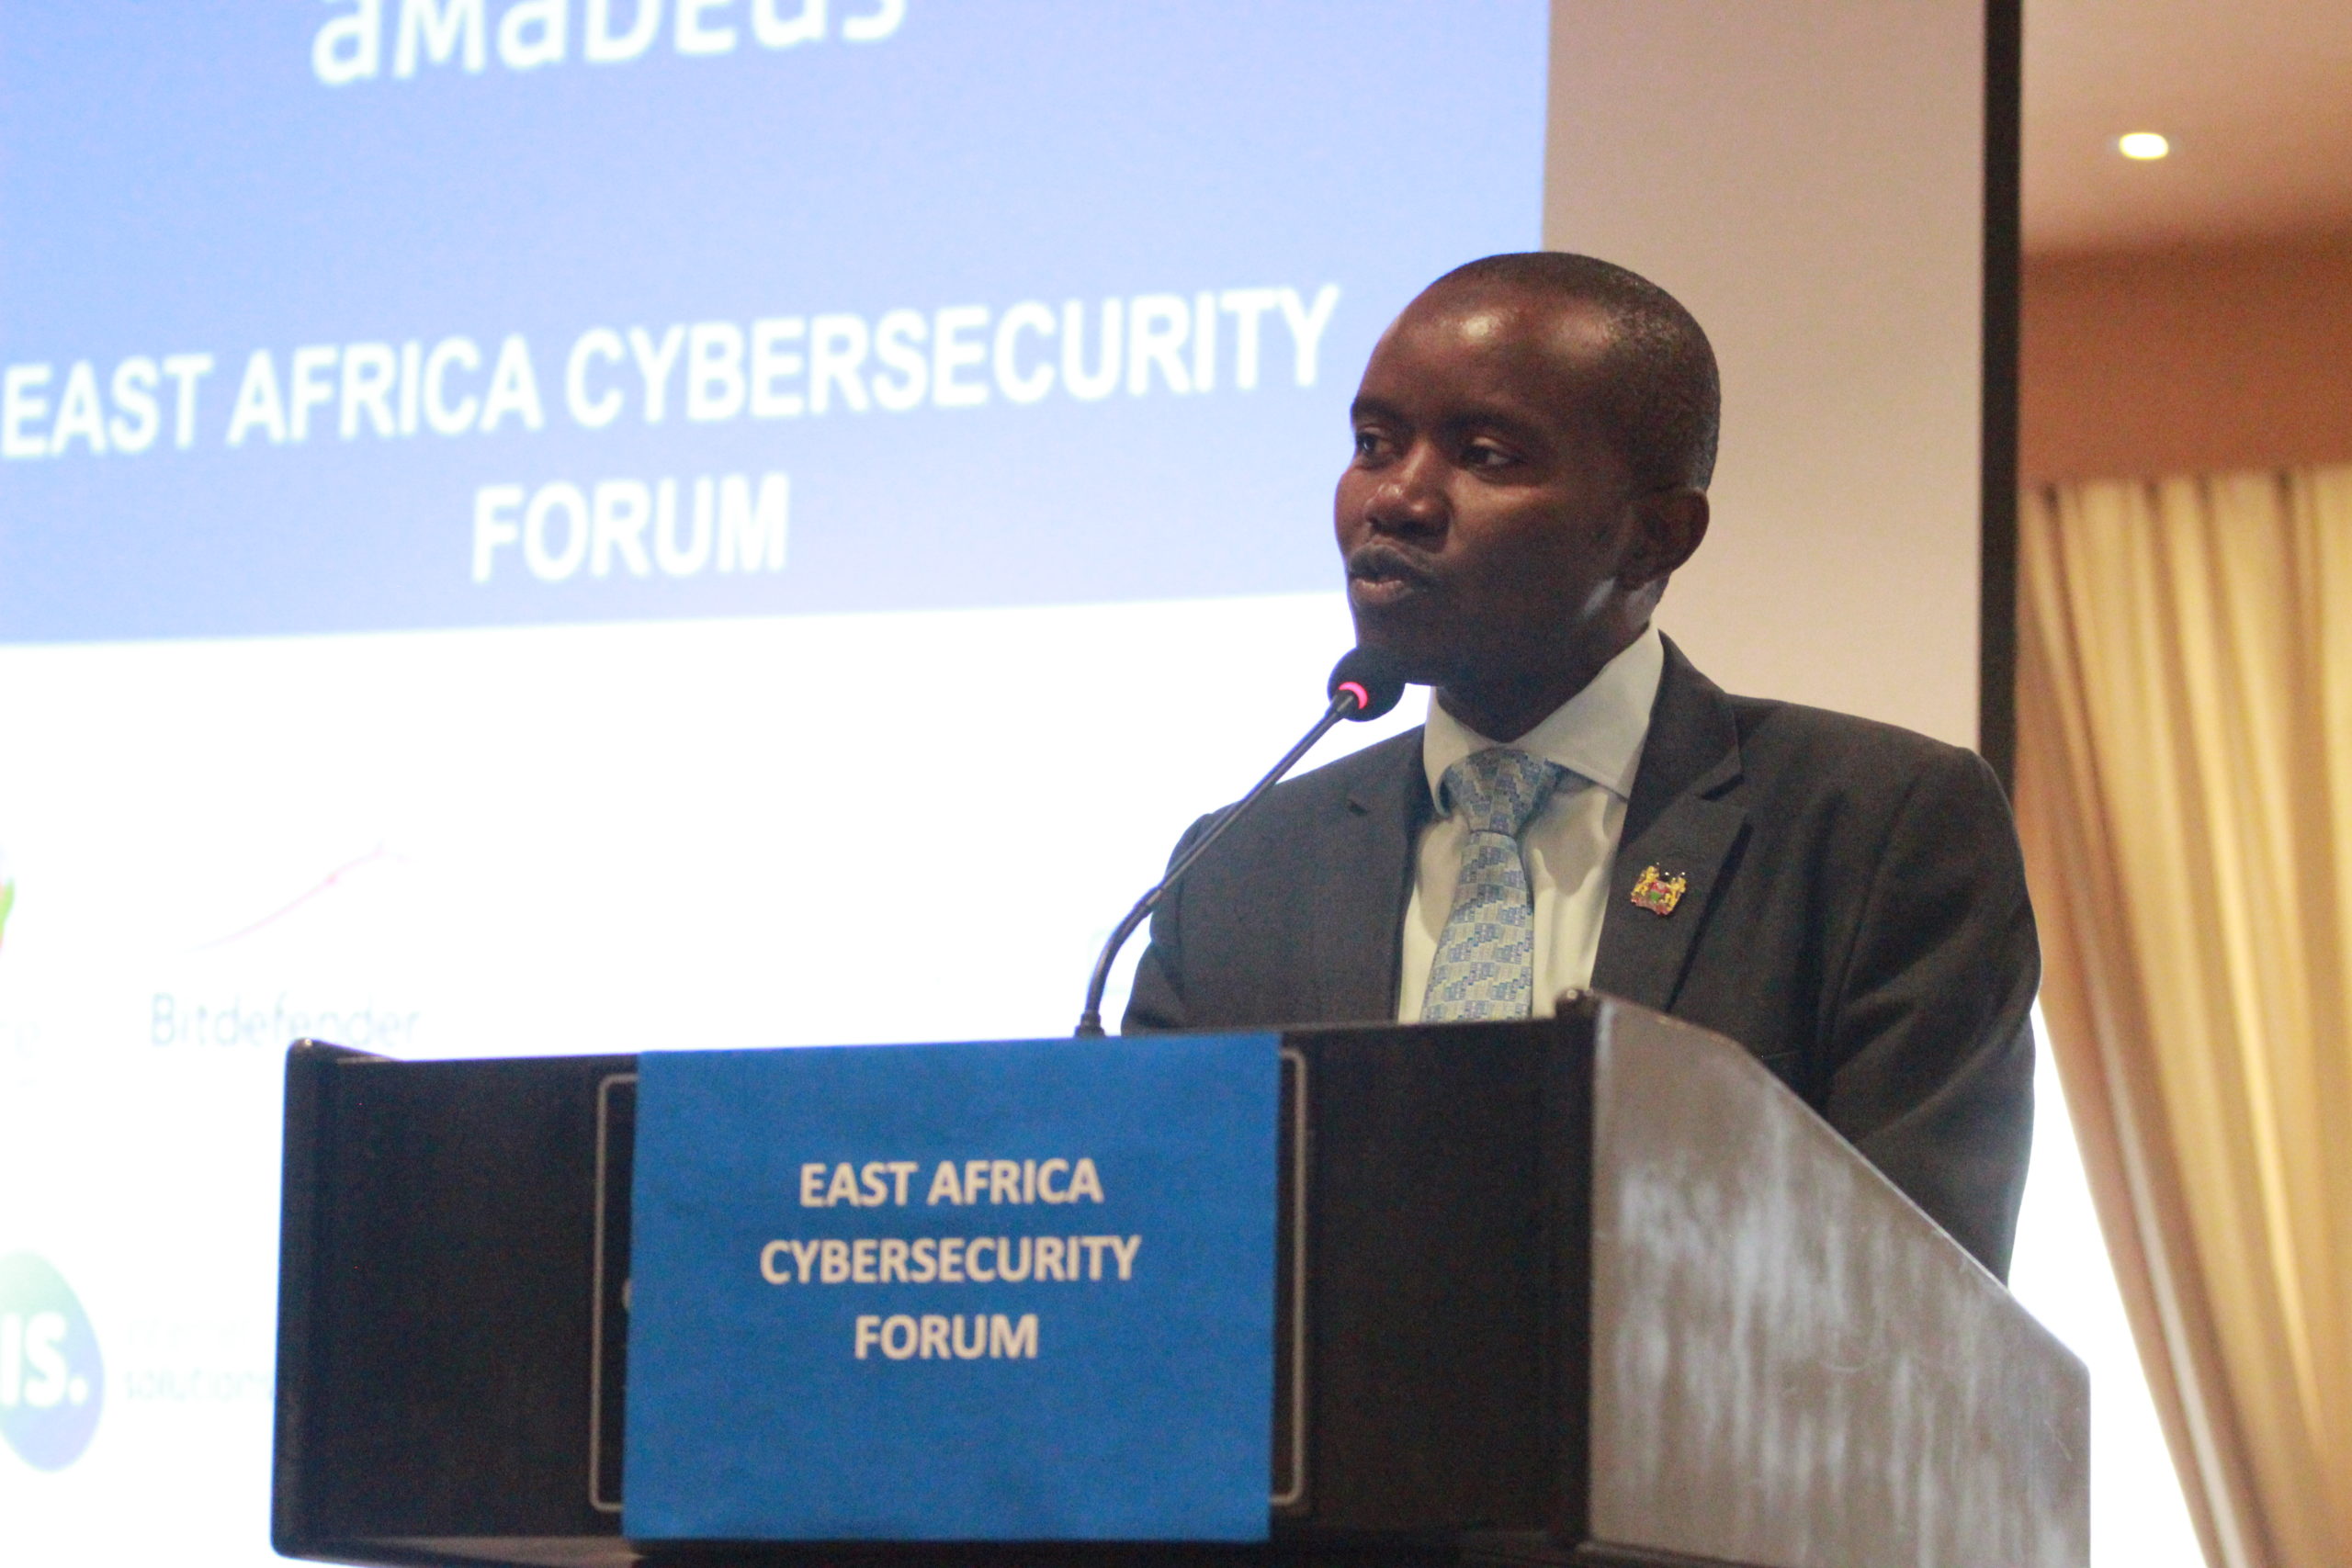 Hon. Joe Mucheru, CS Ministry of ICT, speaking at the East Africa Cybersecurity forum by Amadeus on May 5th 2017